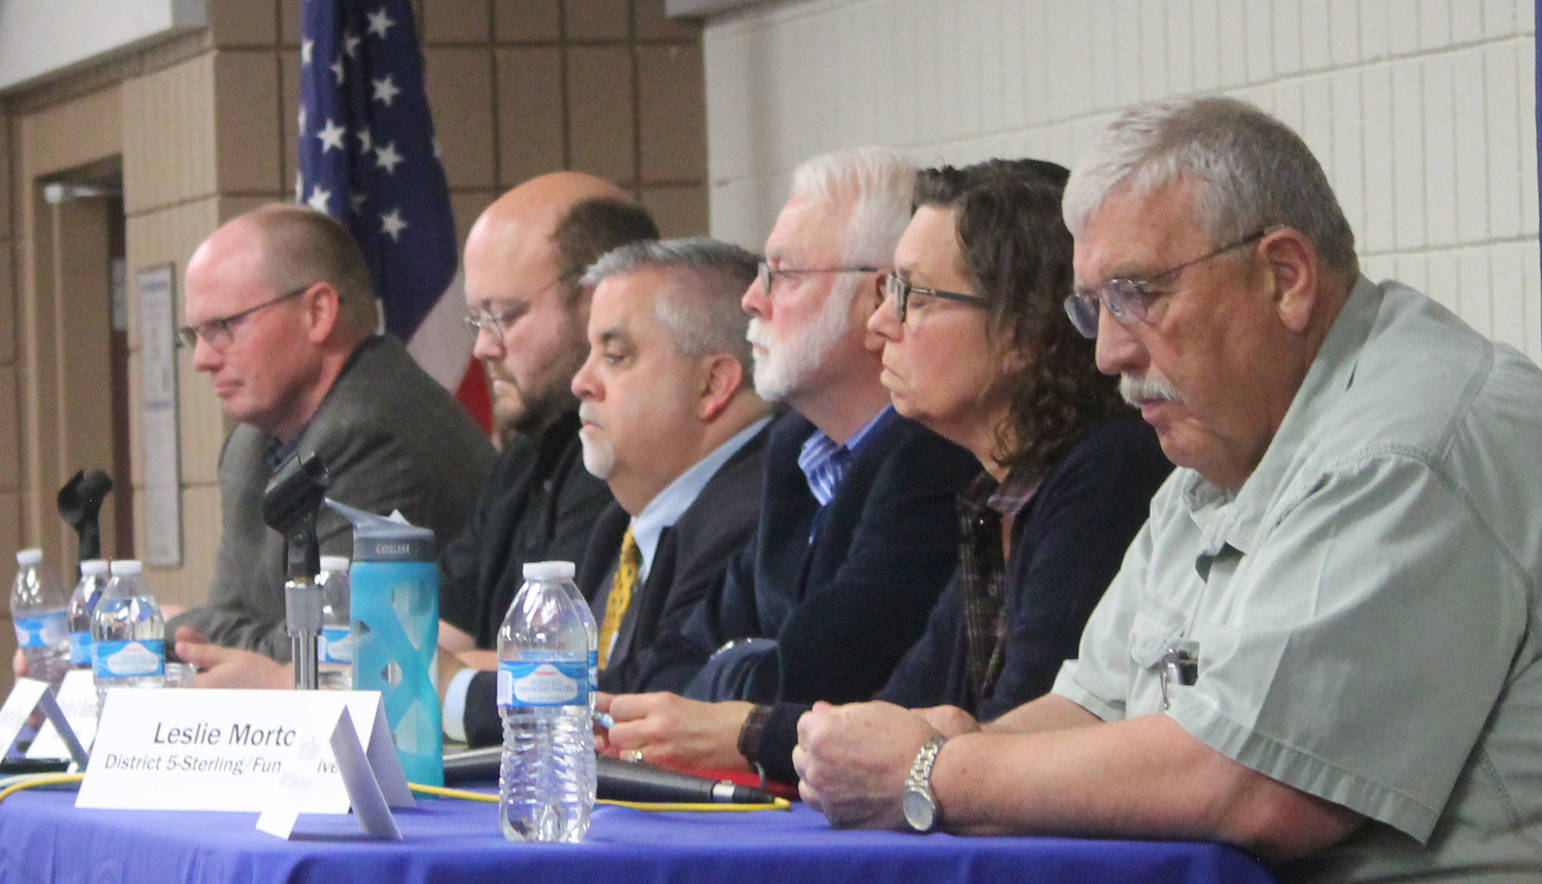 Candidates for Kenai Peninsula Borough Assembly, from left, Brent Hibbert (District 1), Dan Castimore (District 1), Duane Bannock (District 2), Hall Smalley (District 2), Leslie Morton (District 5), and Norm Blakeley (District 5)participate in a candidate forum during a joint meeting of the Kenai and Soldotna Chambers of Commerce at the Soldotna Regional Sports Complex Wednesday. (Photo by Will Morrow/Peninsula Clarion)